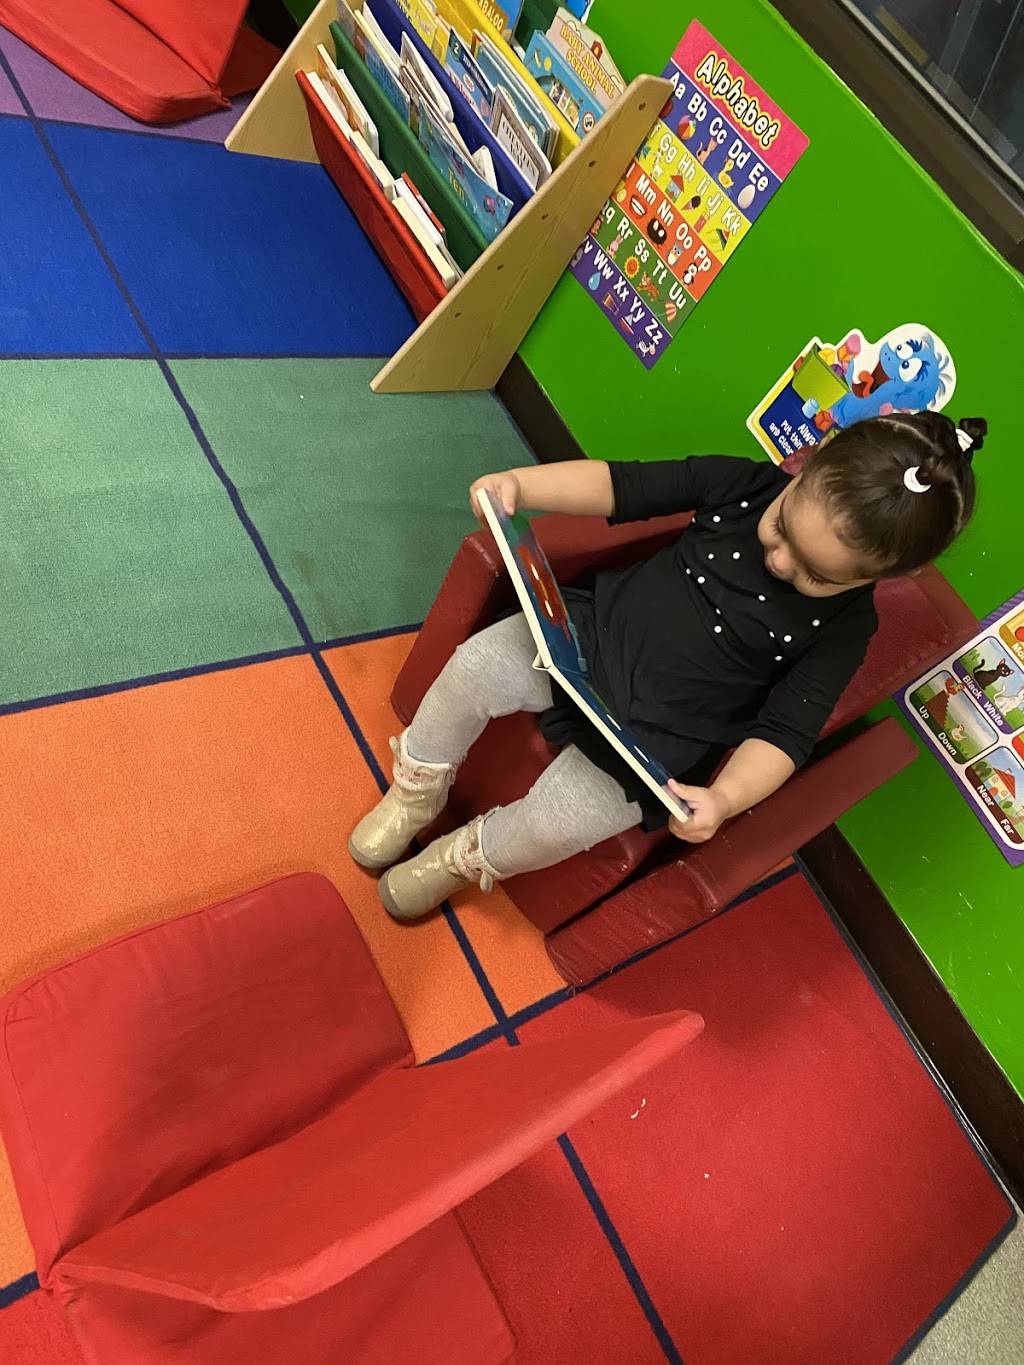 Little Angels Early Education Center | 102 Lynn St, Peabody, MA 01960, USA | Phone: (978) 587-3584